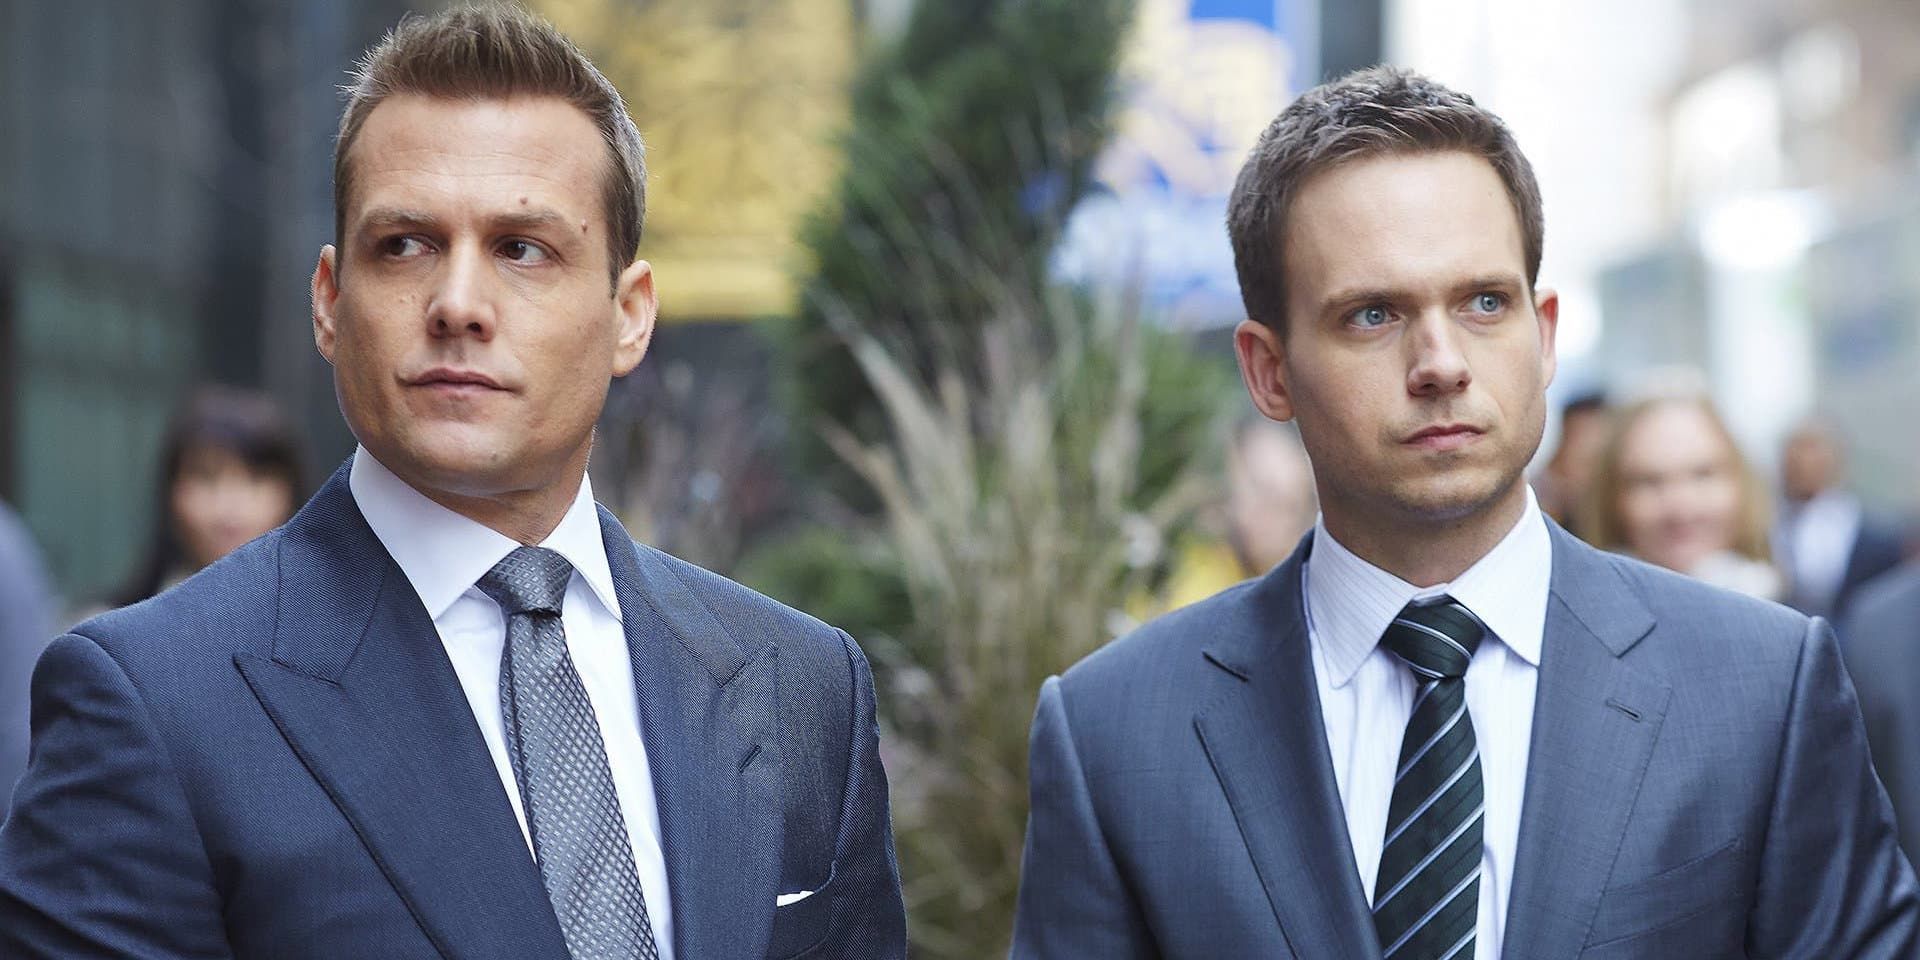 Gabriel Macht (left) portraying Harvey Specter, and Patrick J. Adams (right) playing Mike Ross